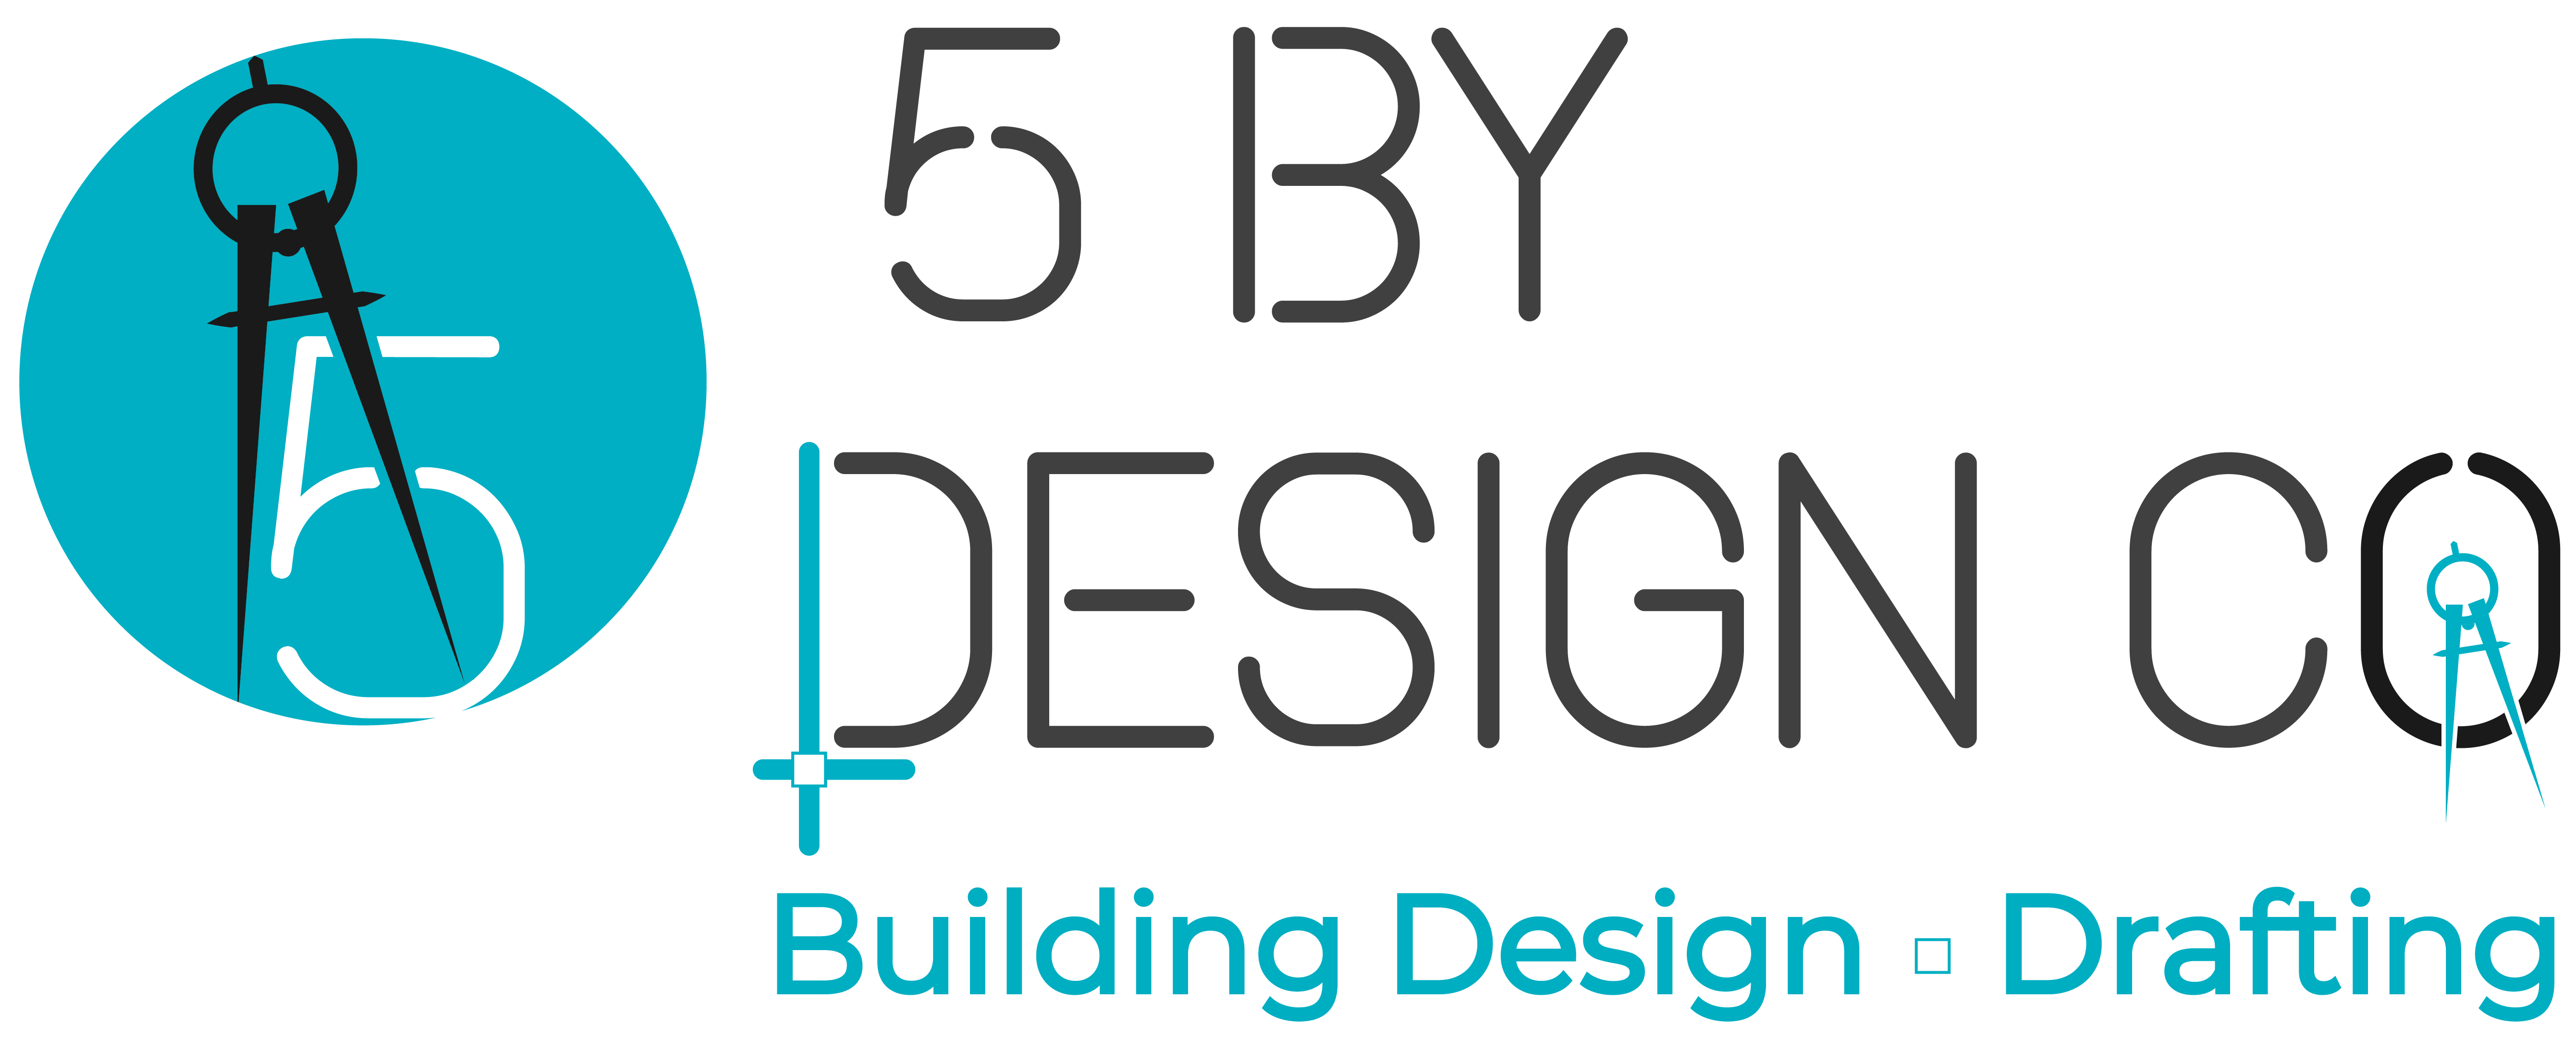 5 By Design Co